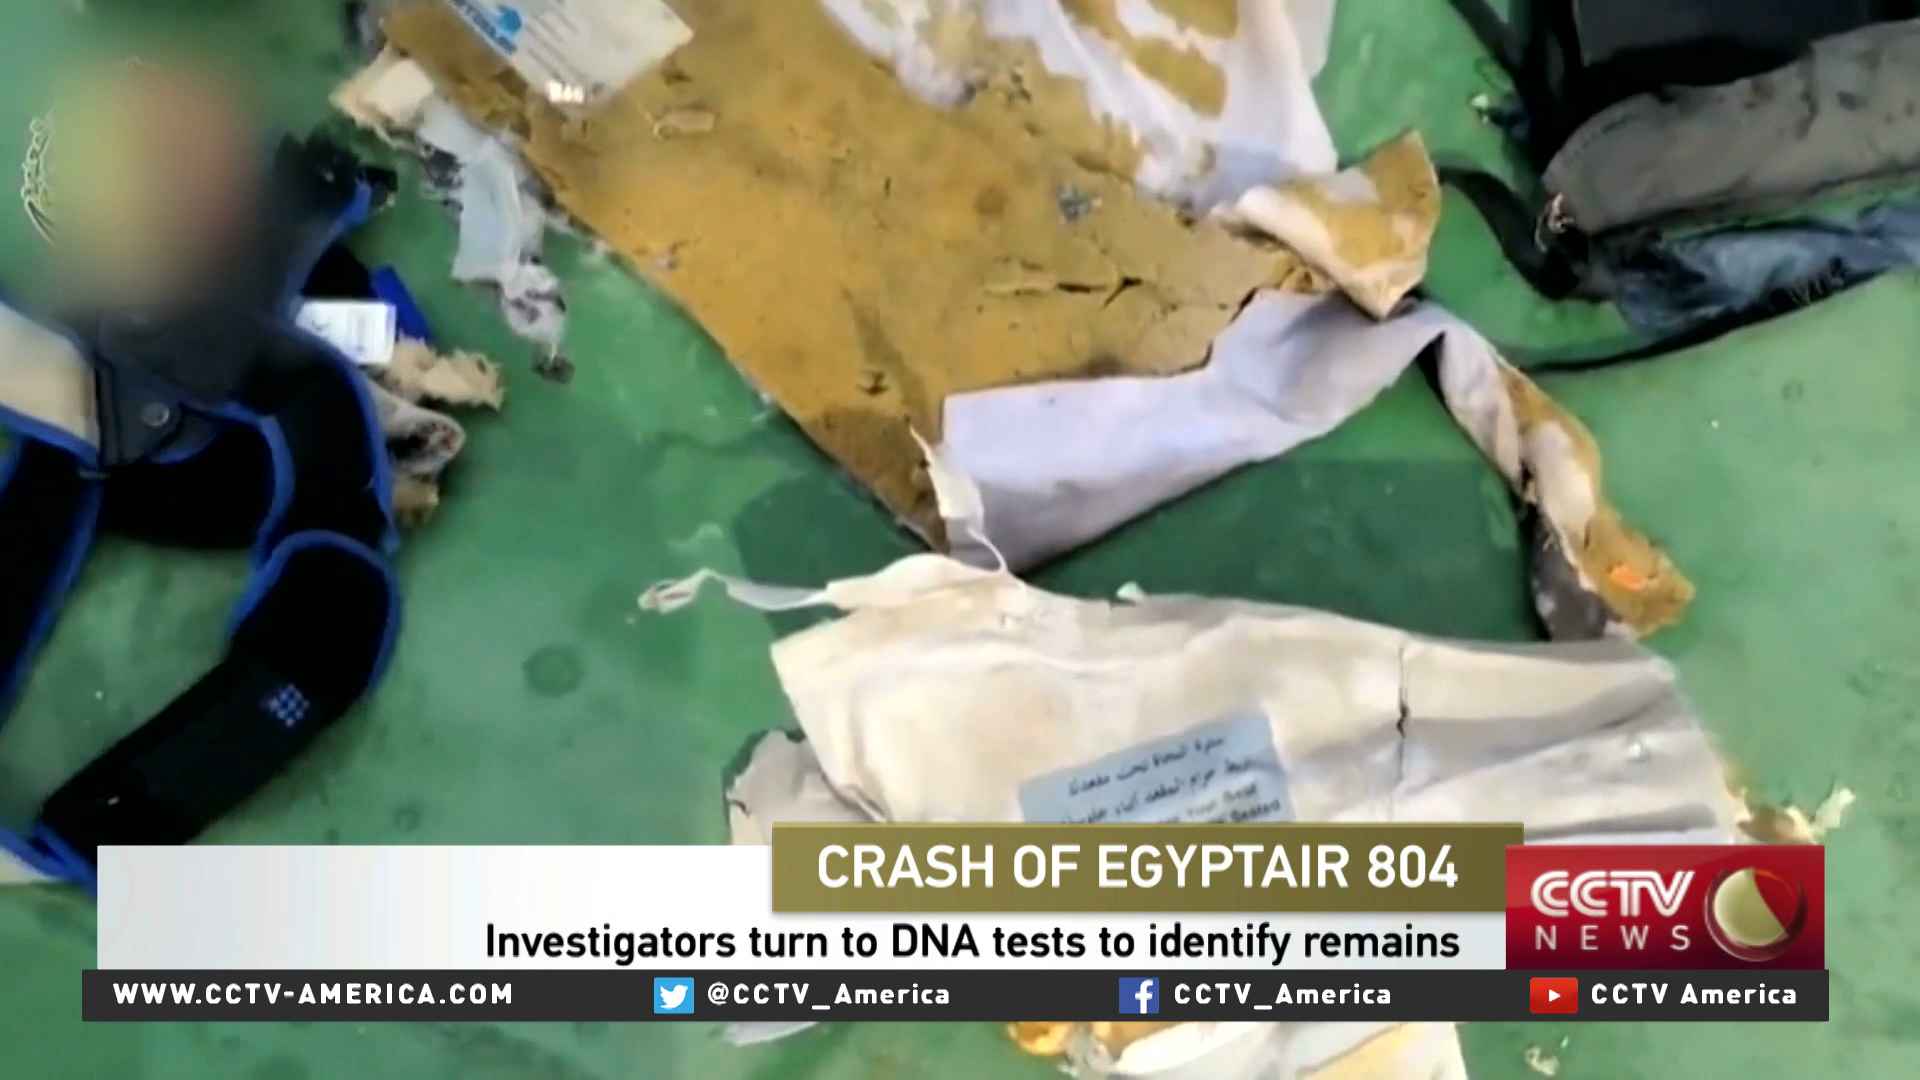 Investigators turn to DNA tests to identify remains from EgyptAir crash